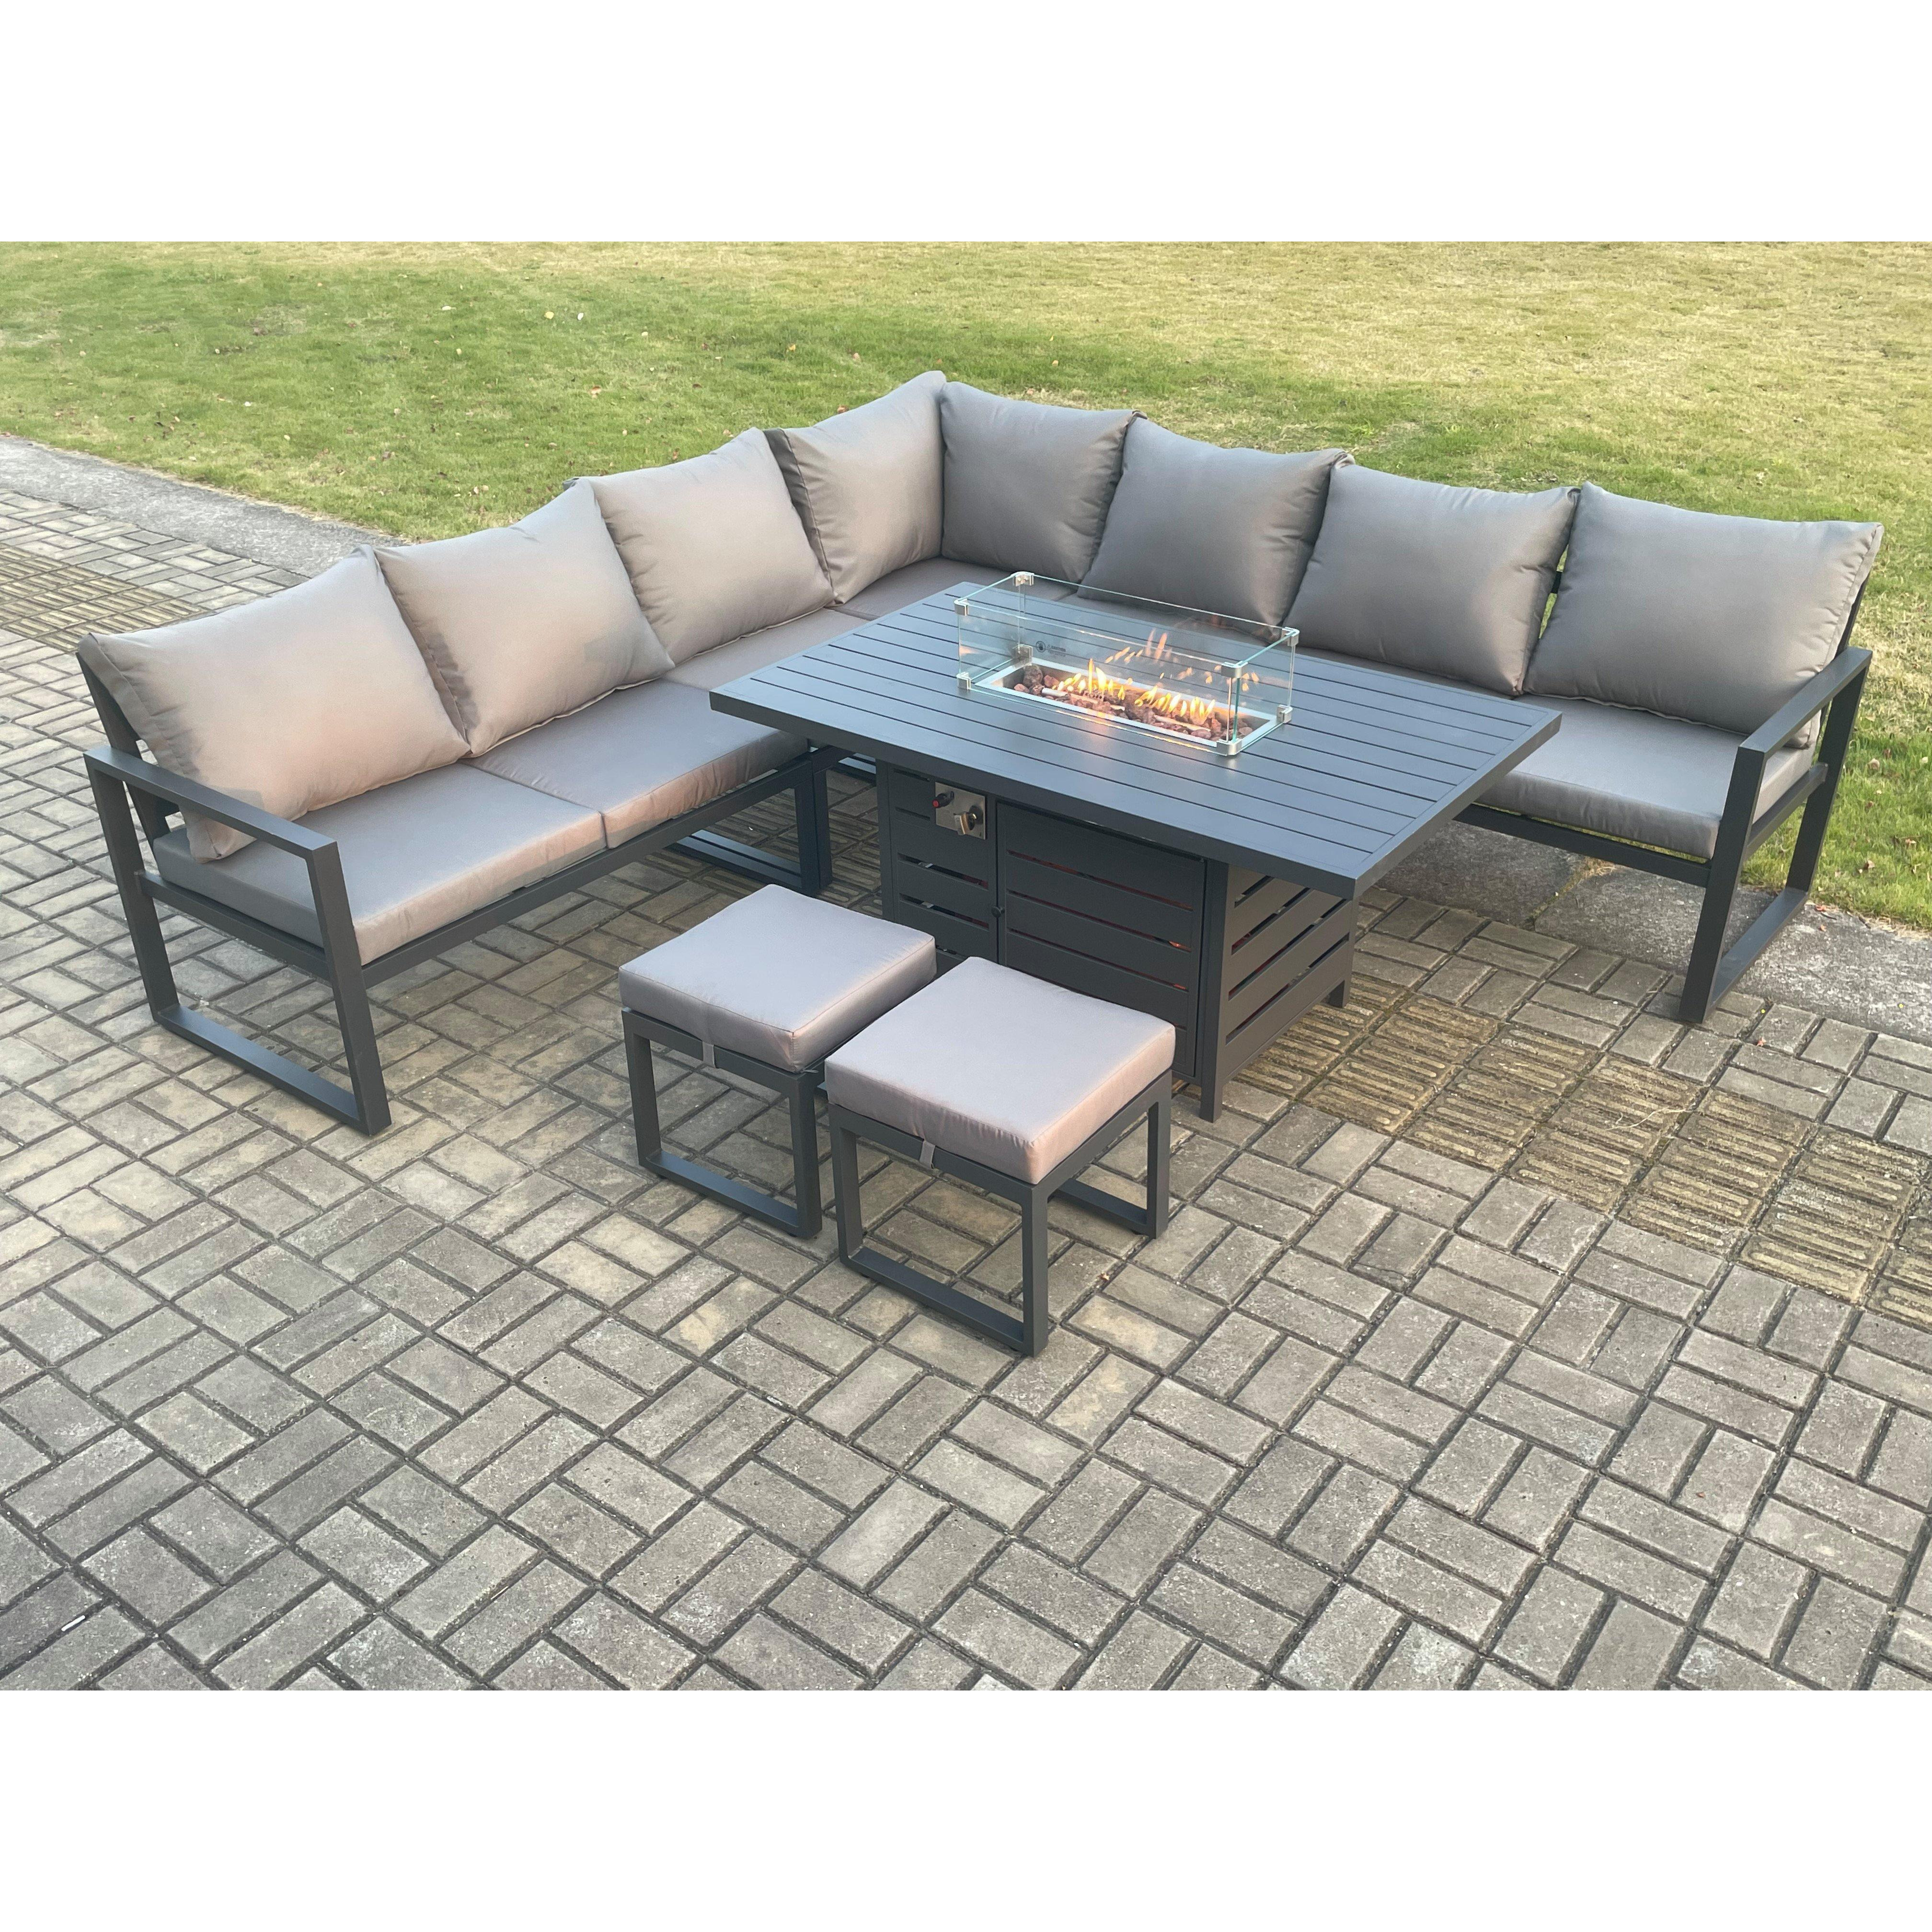 Aluminium 9 Seater Garden Furniture Outdoor Set Patio Lounge Sofa Gas Fire Pit Dining Table Set with Footstools Dark Grey - image 1